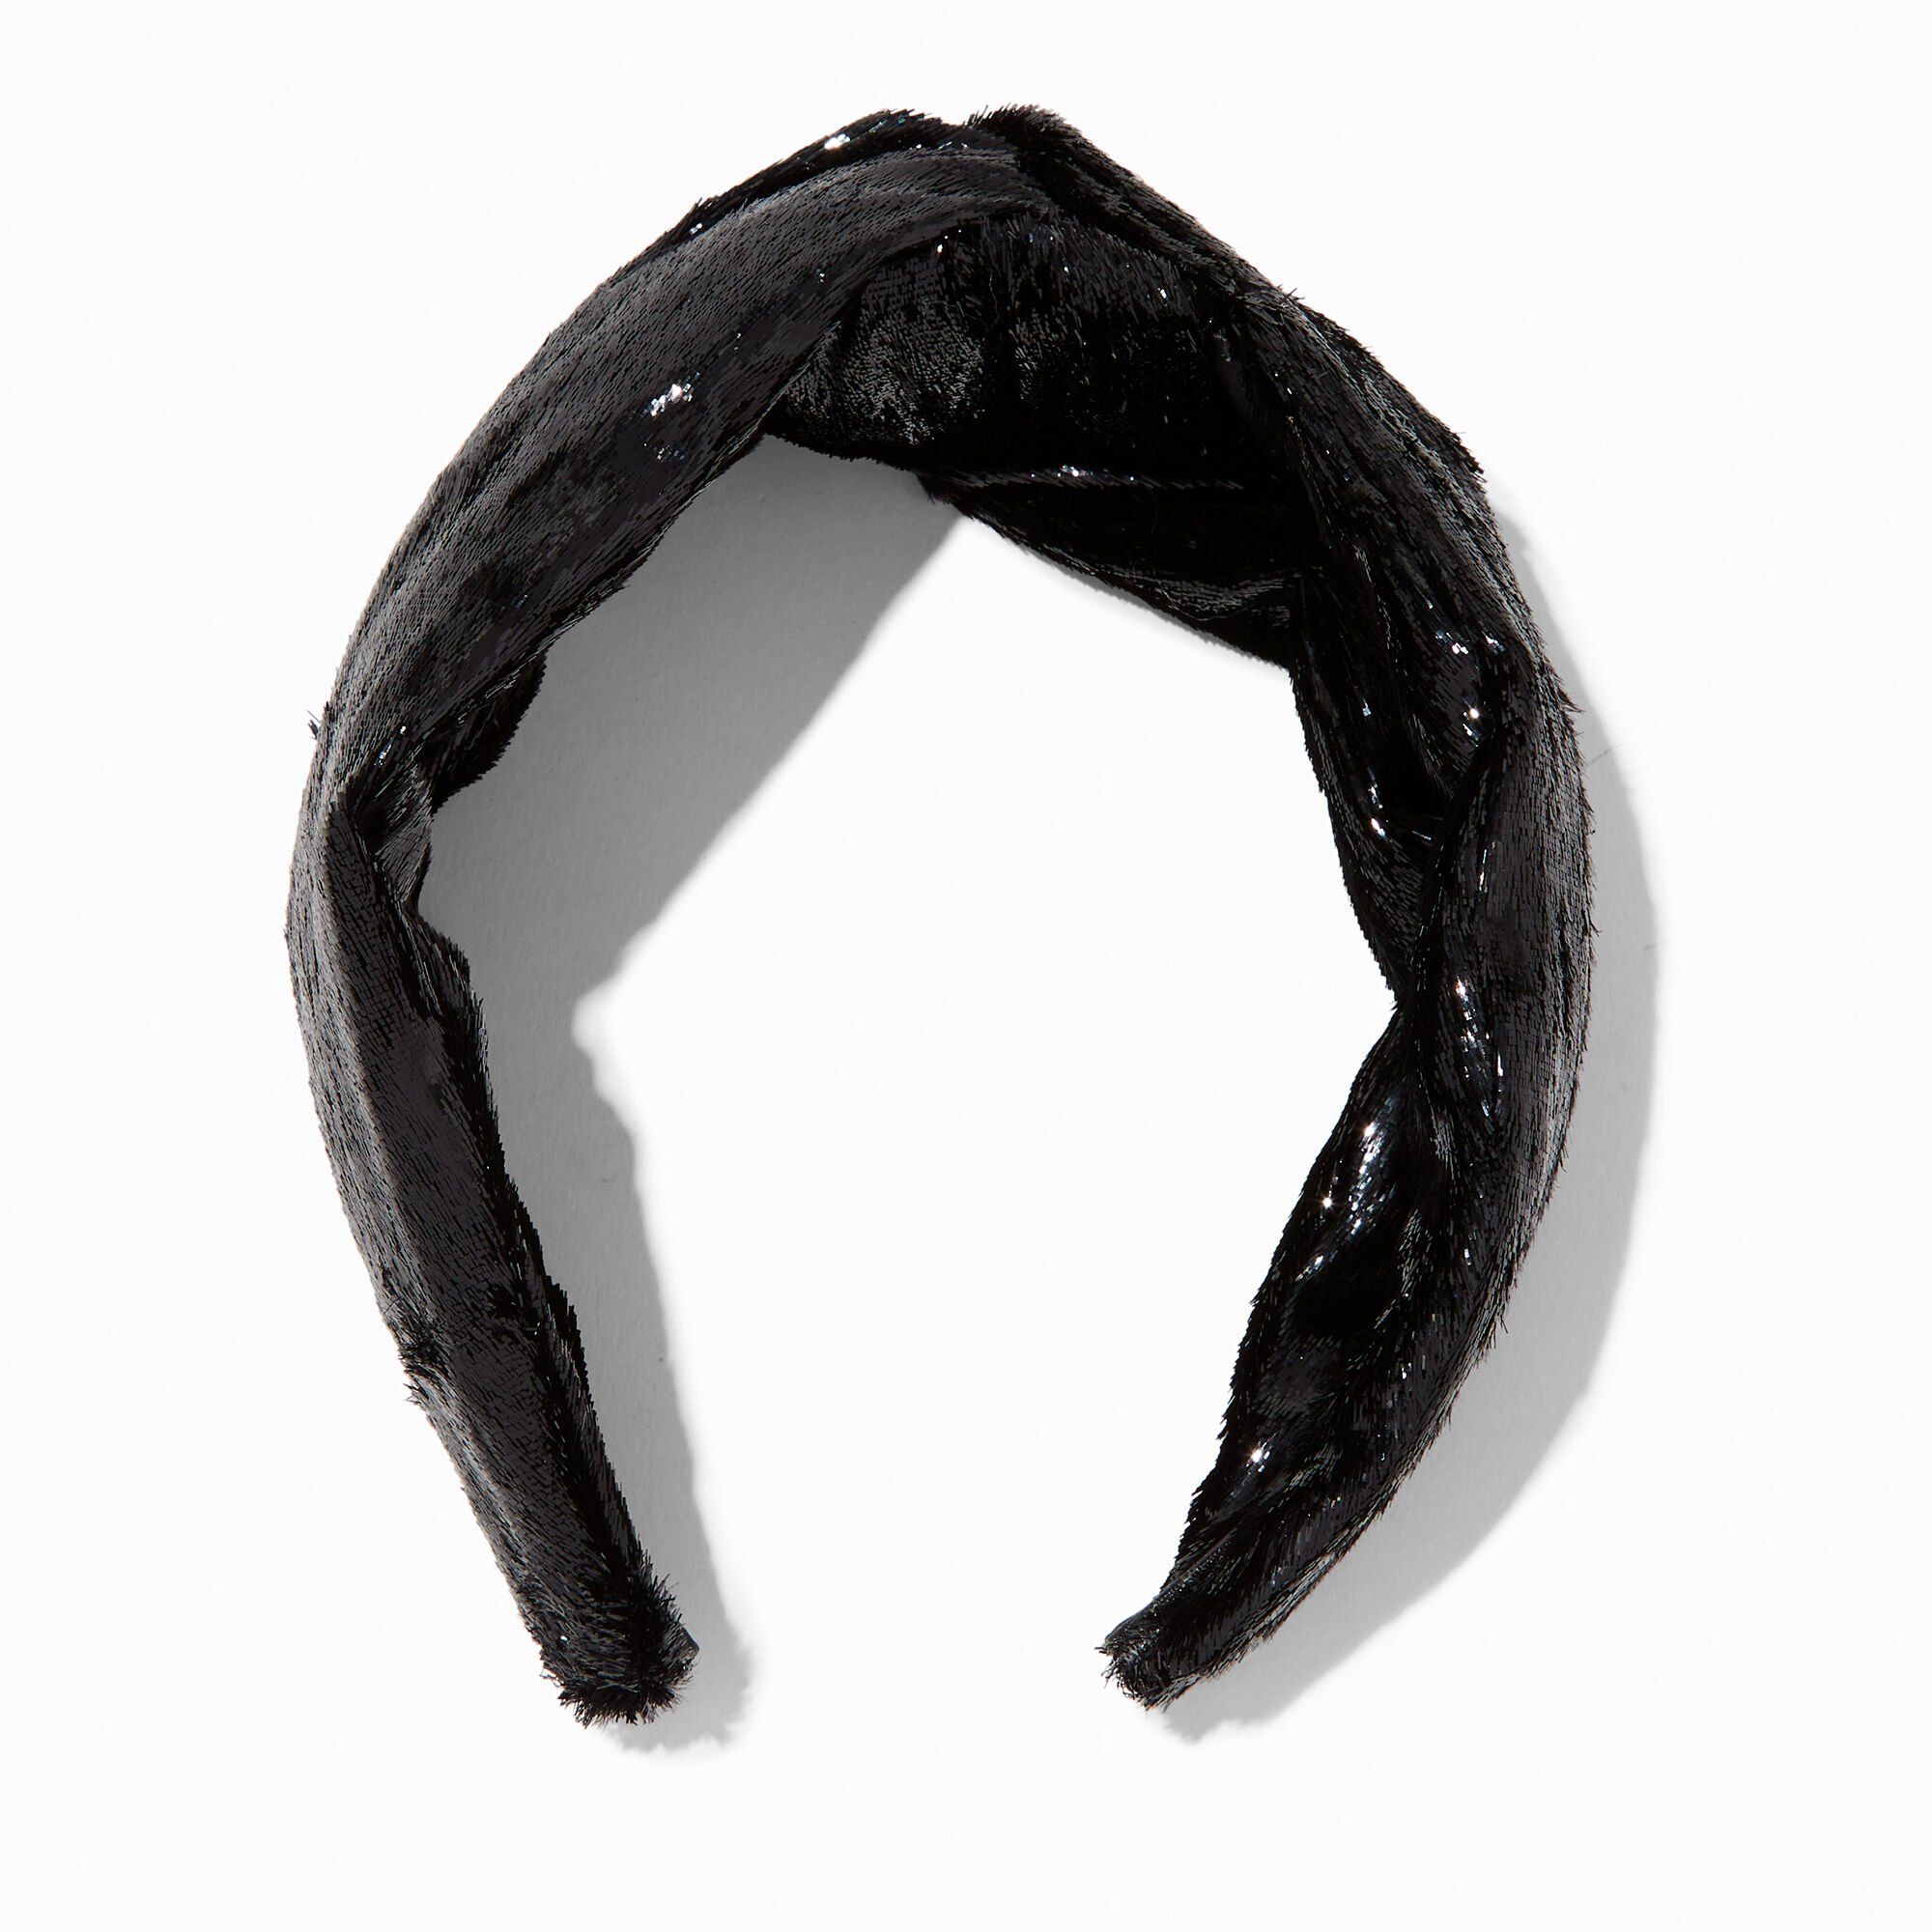 View Claires Liquid Velvet Knotted Headband Black information